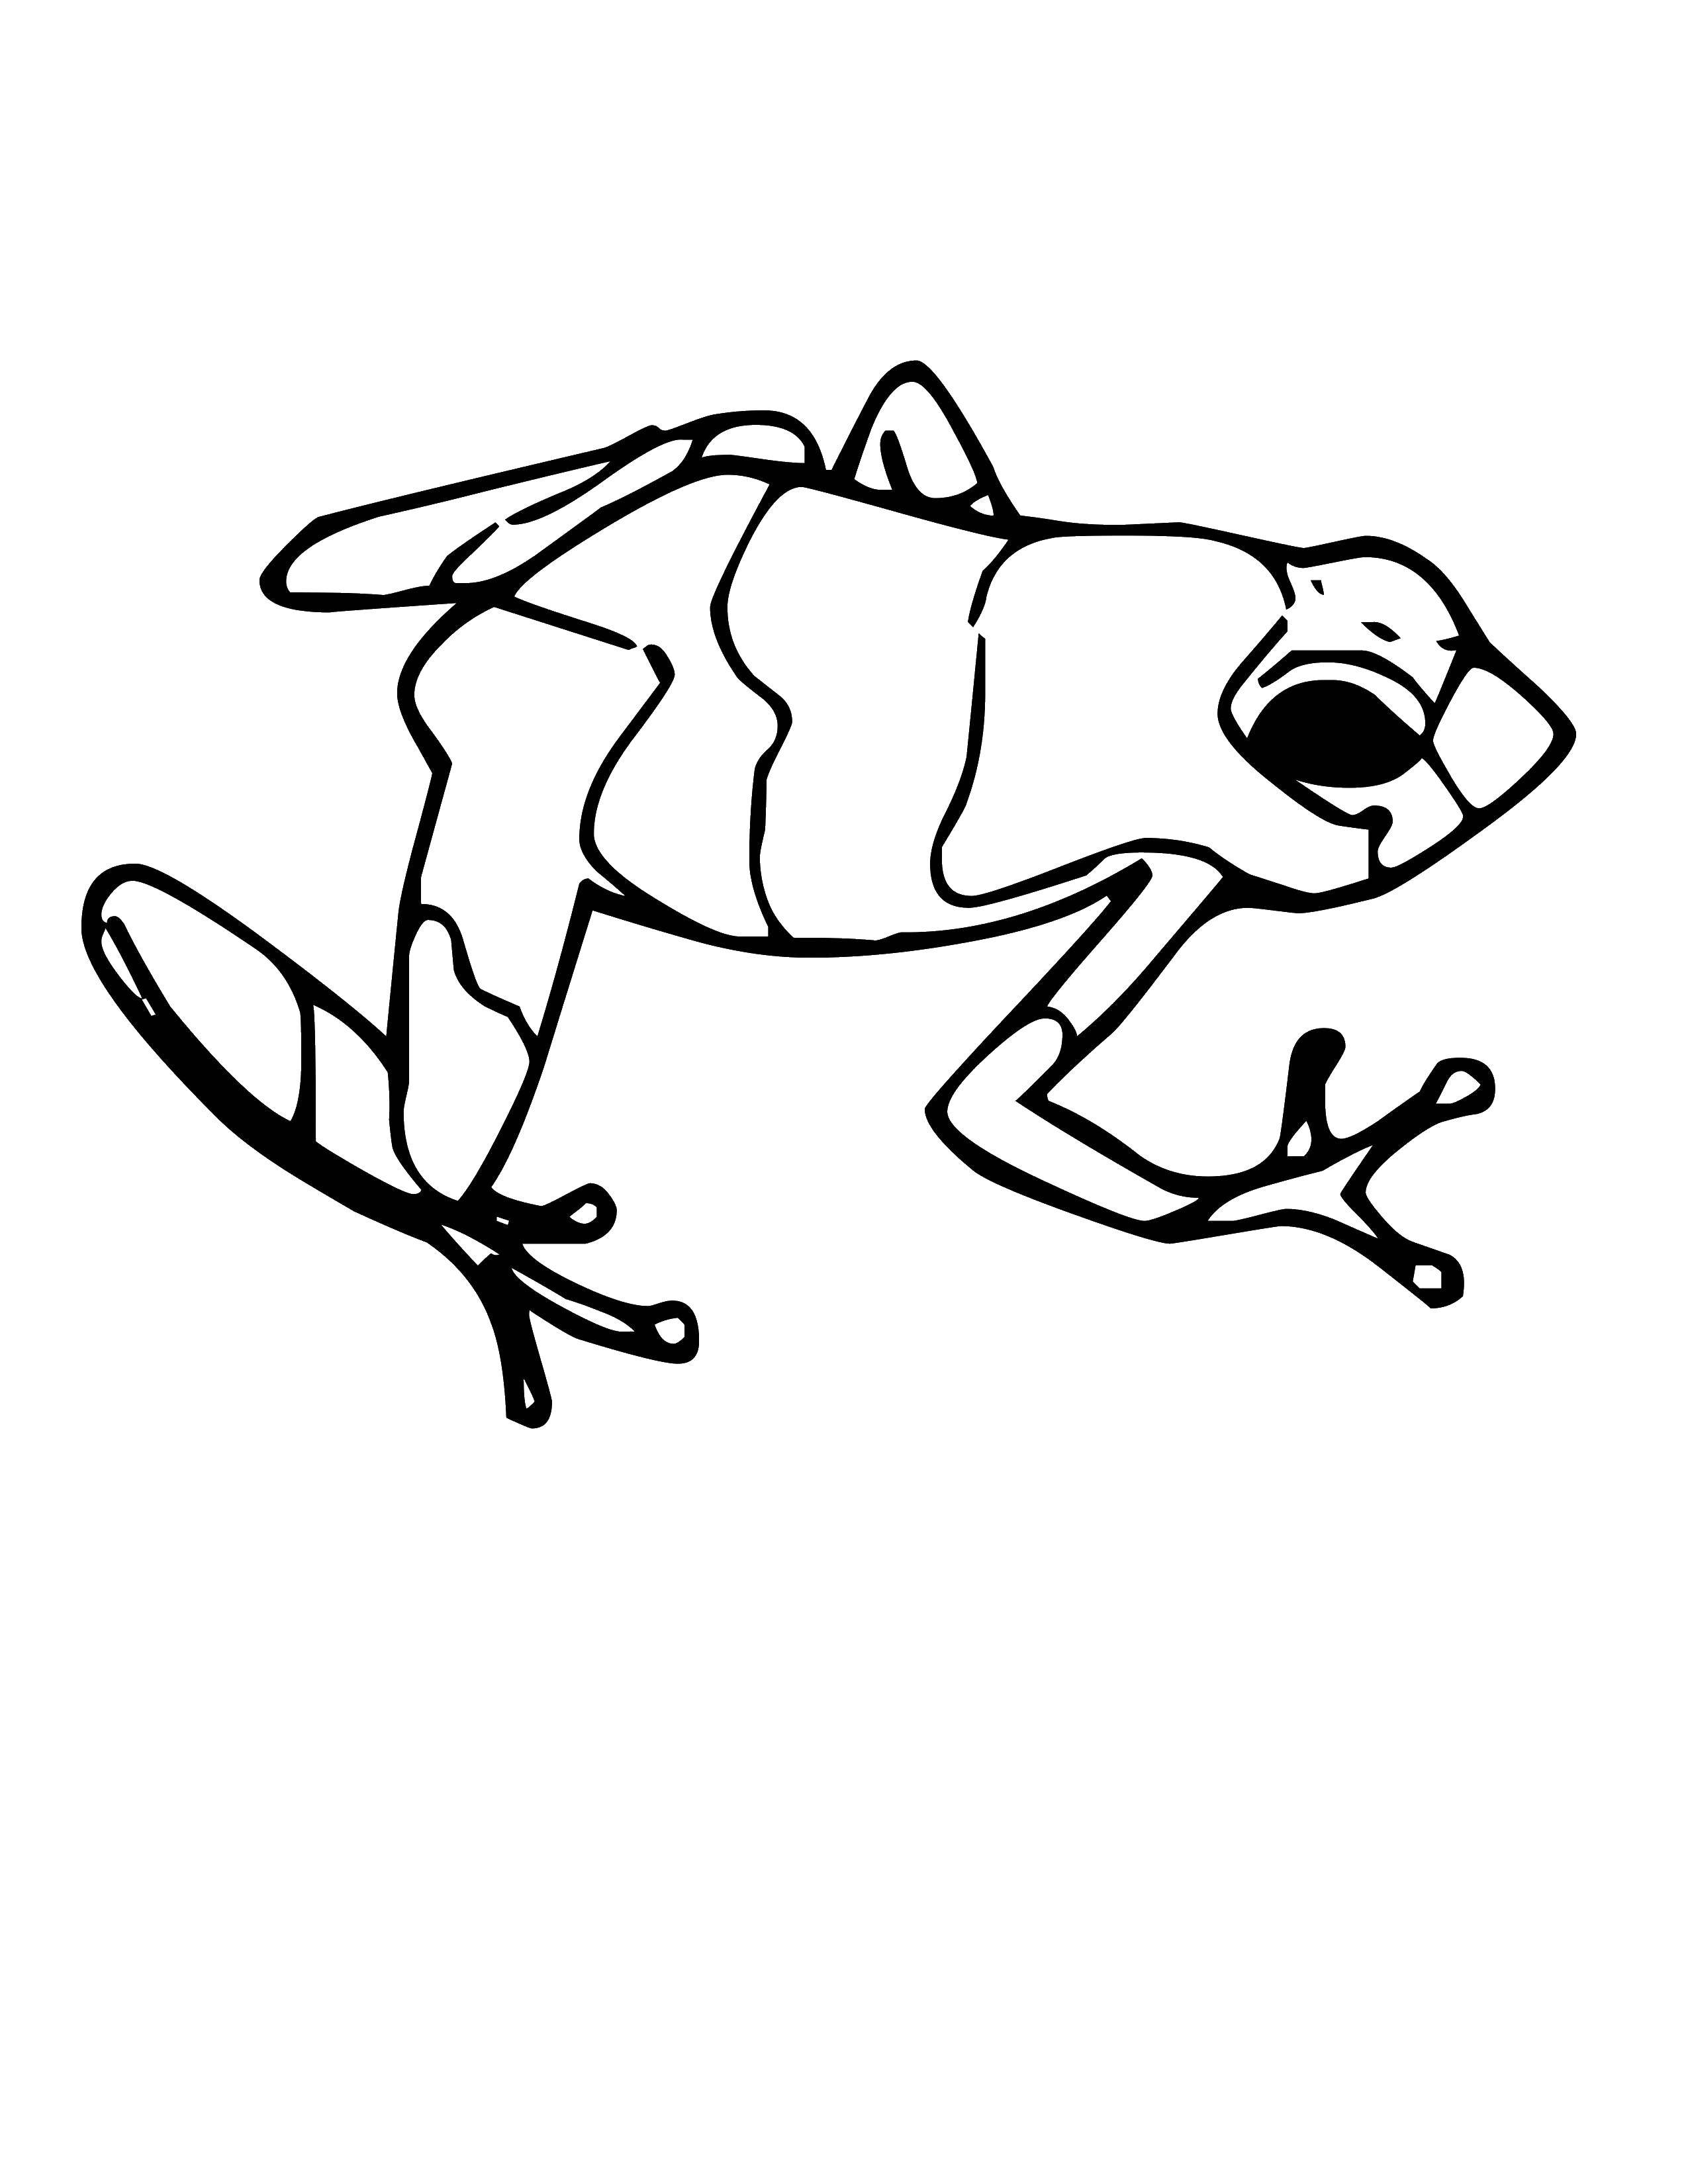 Coloring Frog. Category animals. Tags:  animals, frog.